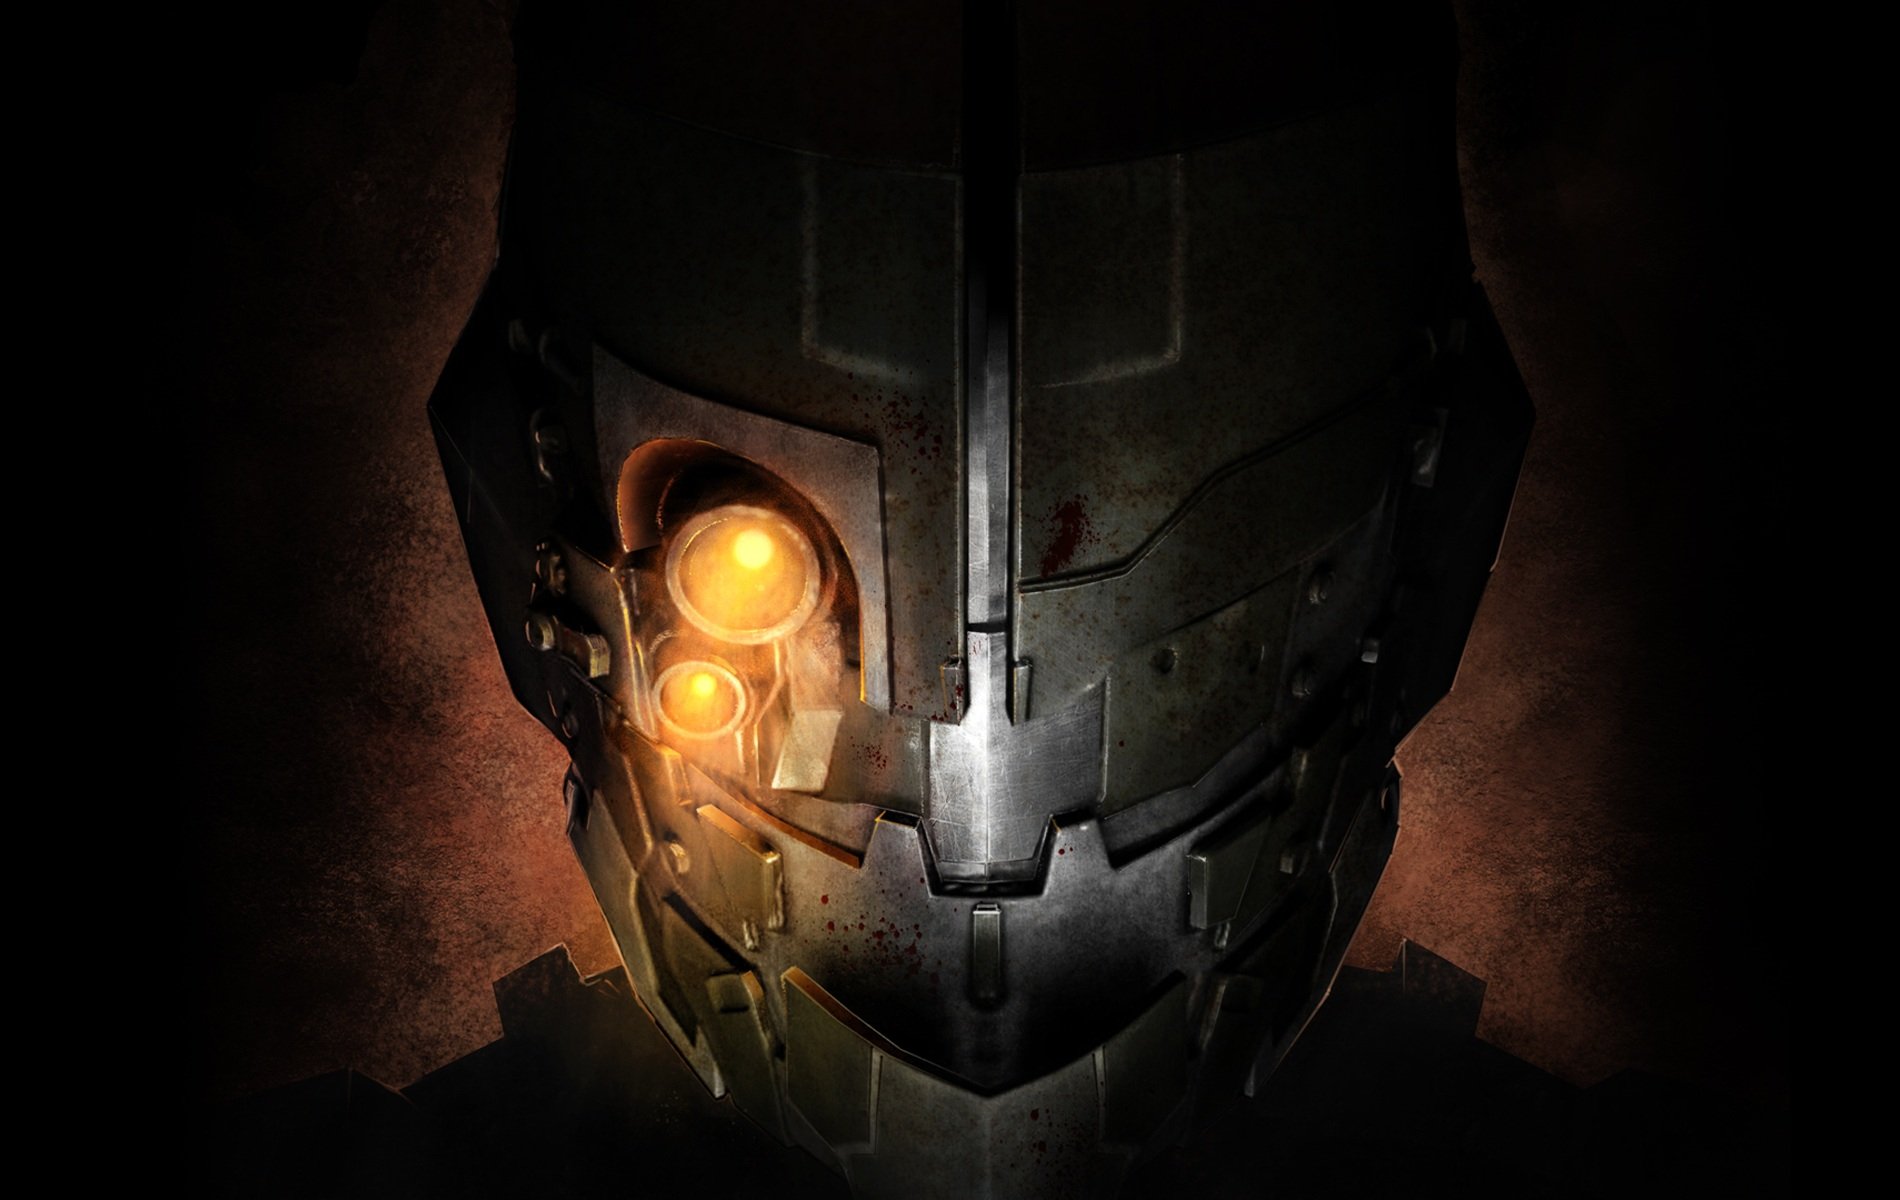 dead space 2 mod for pc